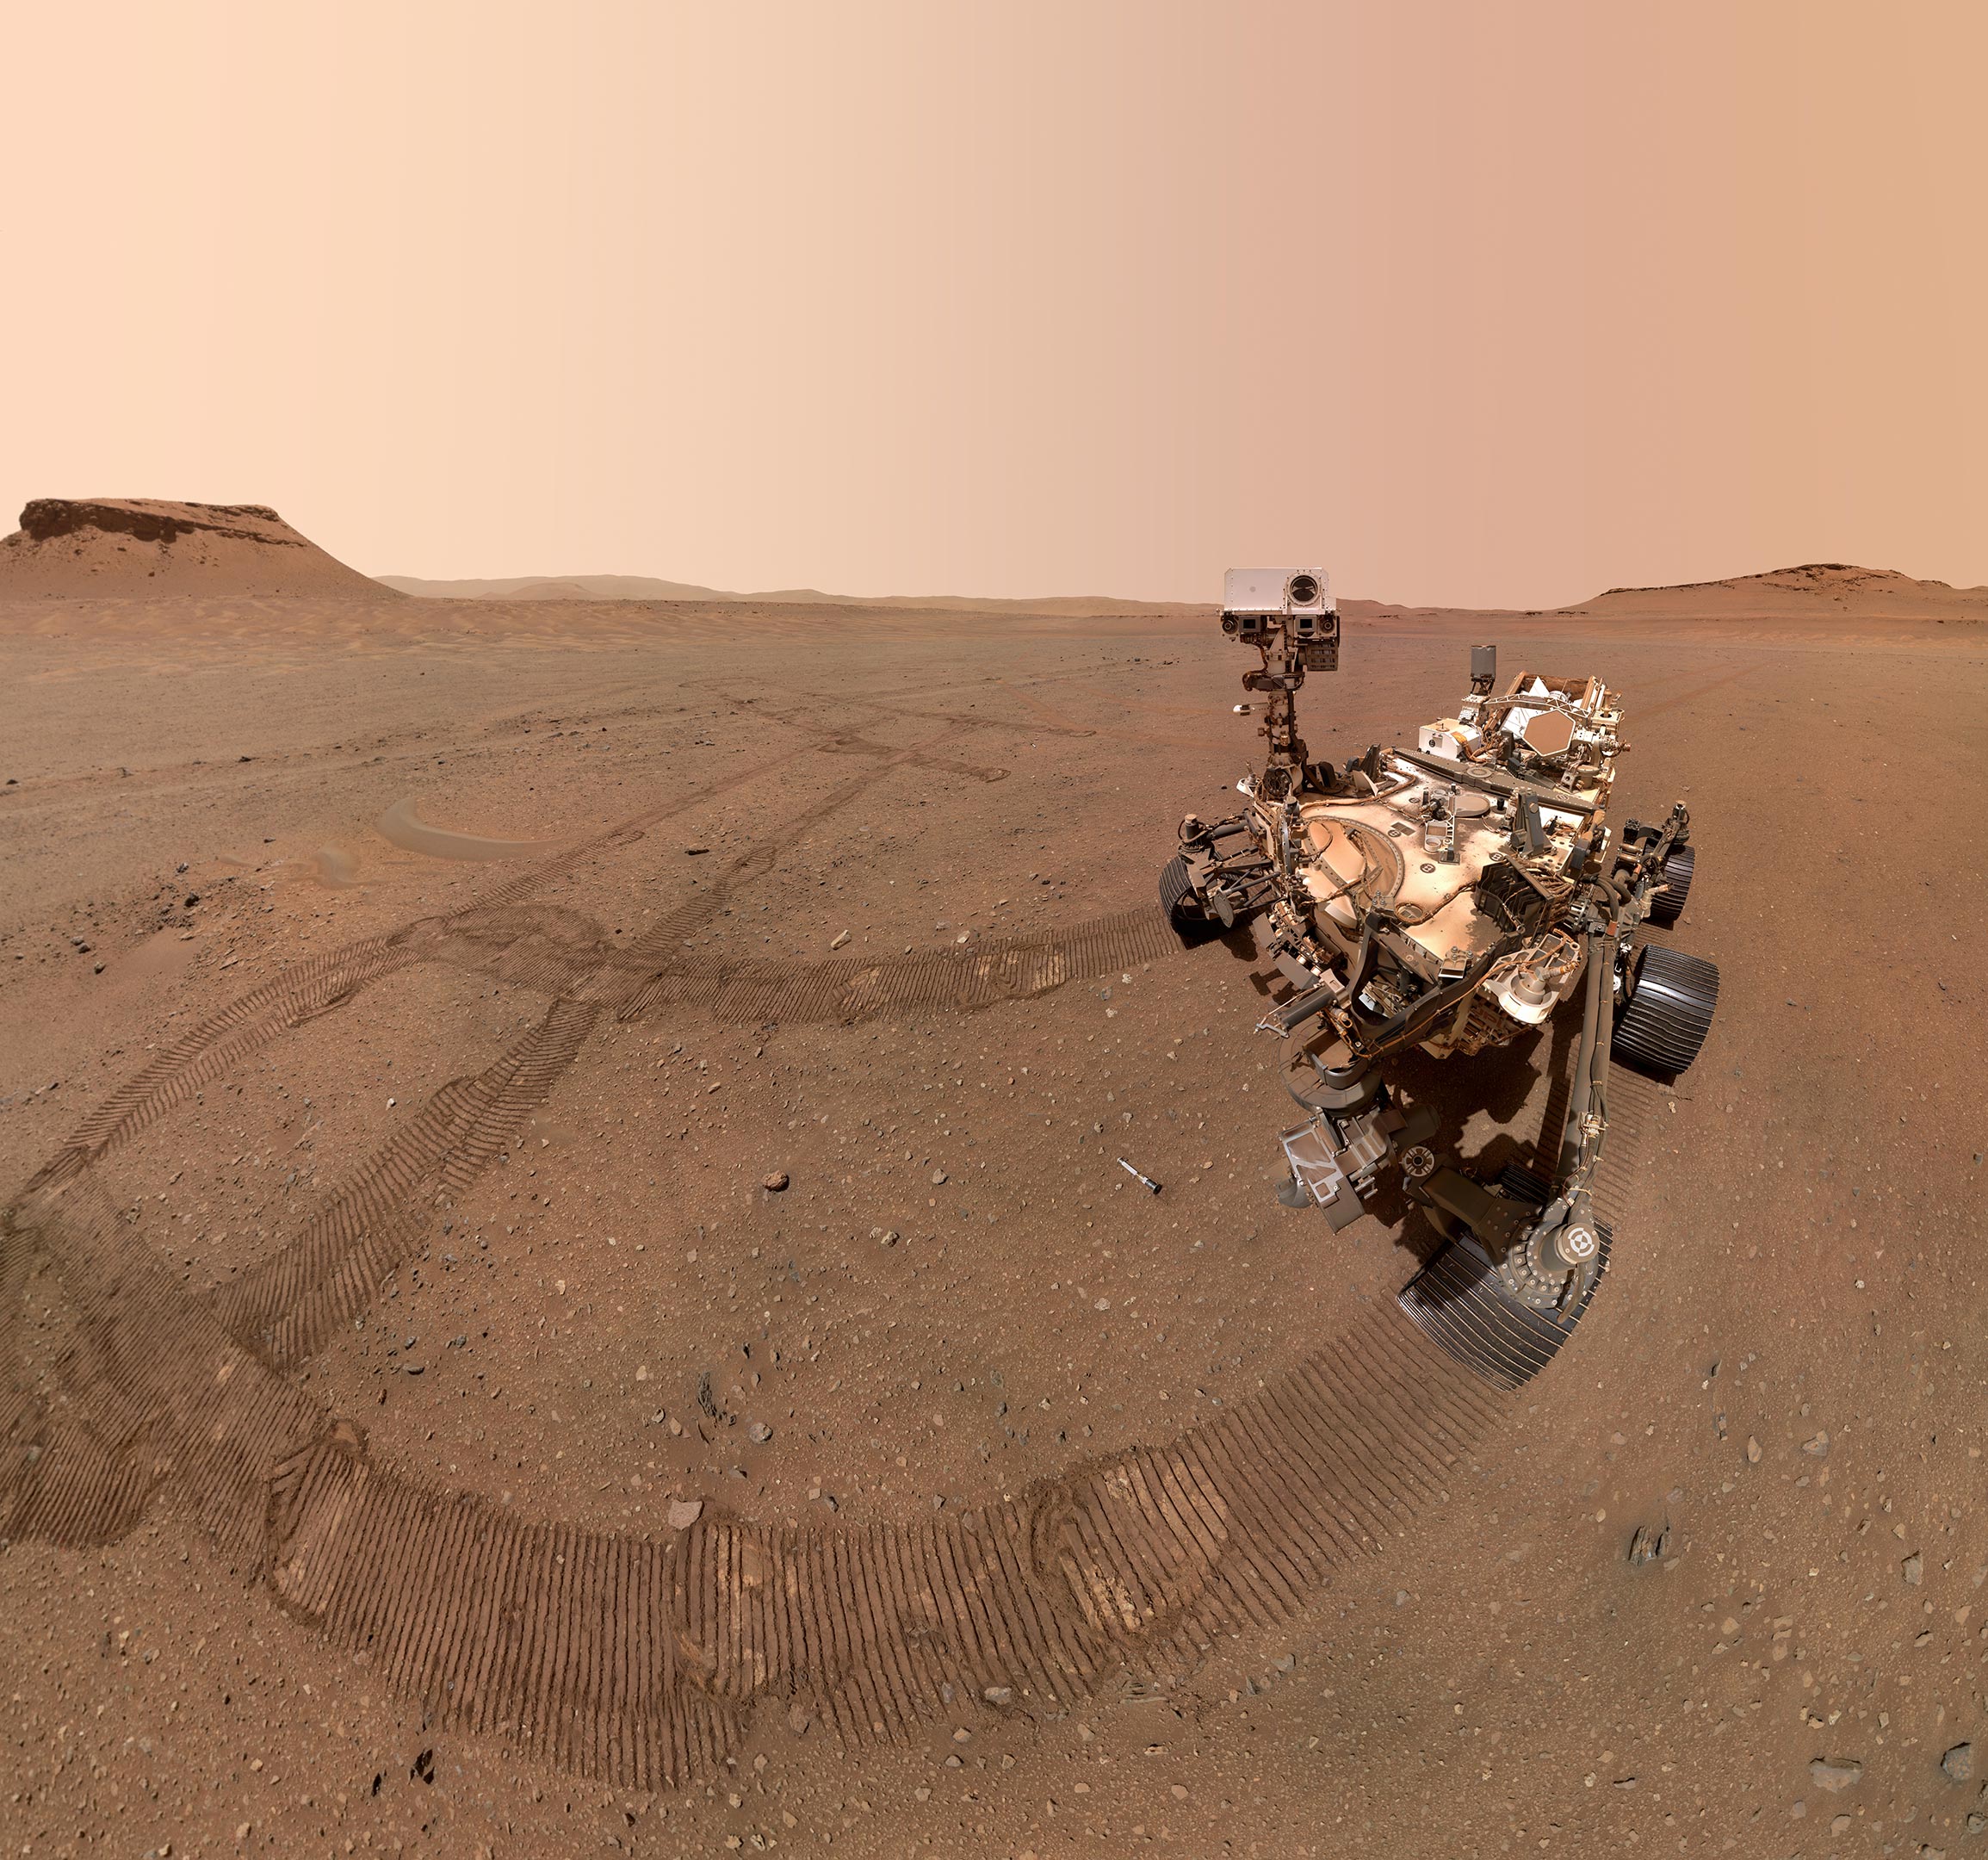 NASA’s Perseverance Rover Completes Mars Sample Depot – Captures Amazing Variety of Martian Geology – SciTechDaily